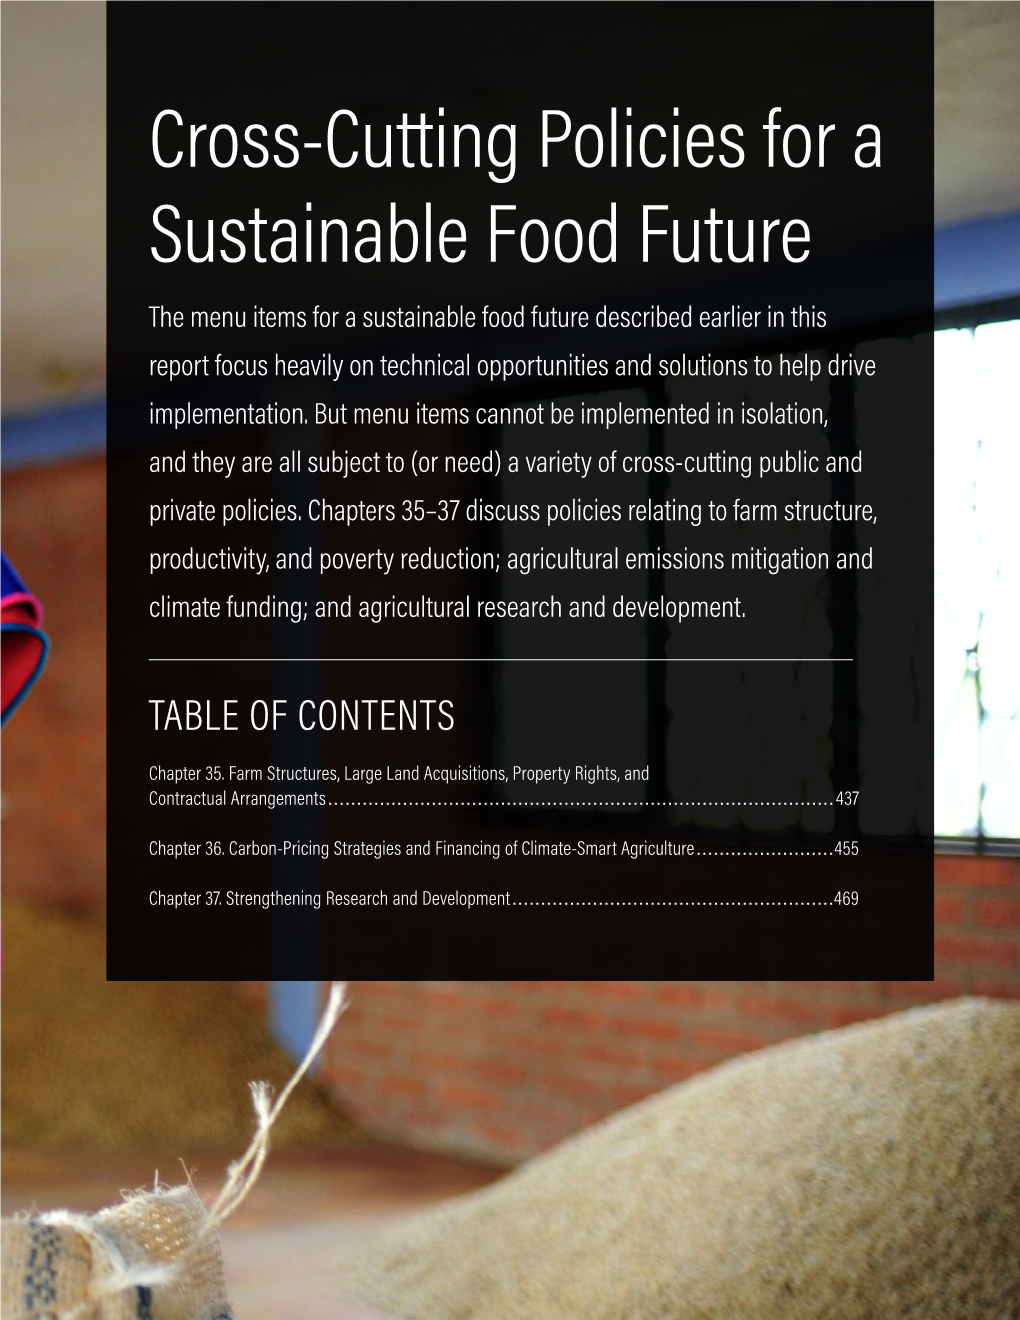 Cross-Cutting Policies for a Sustainable Food Future